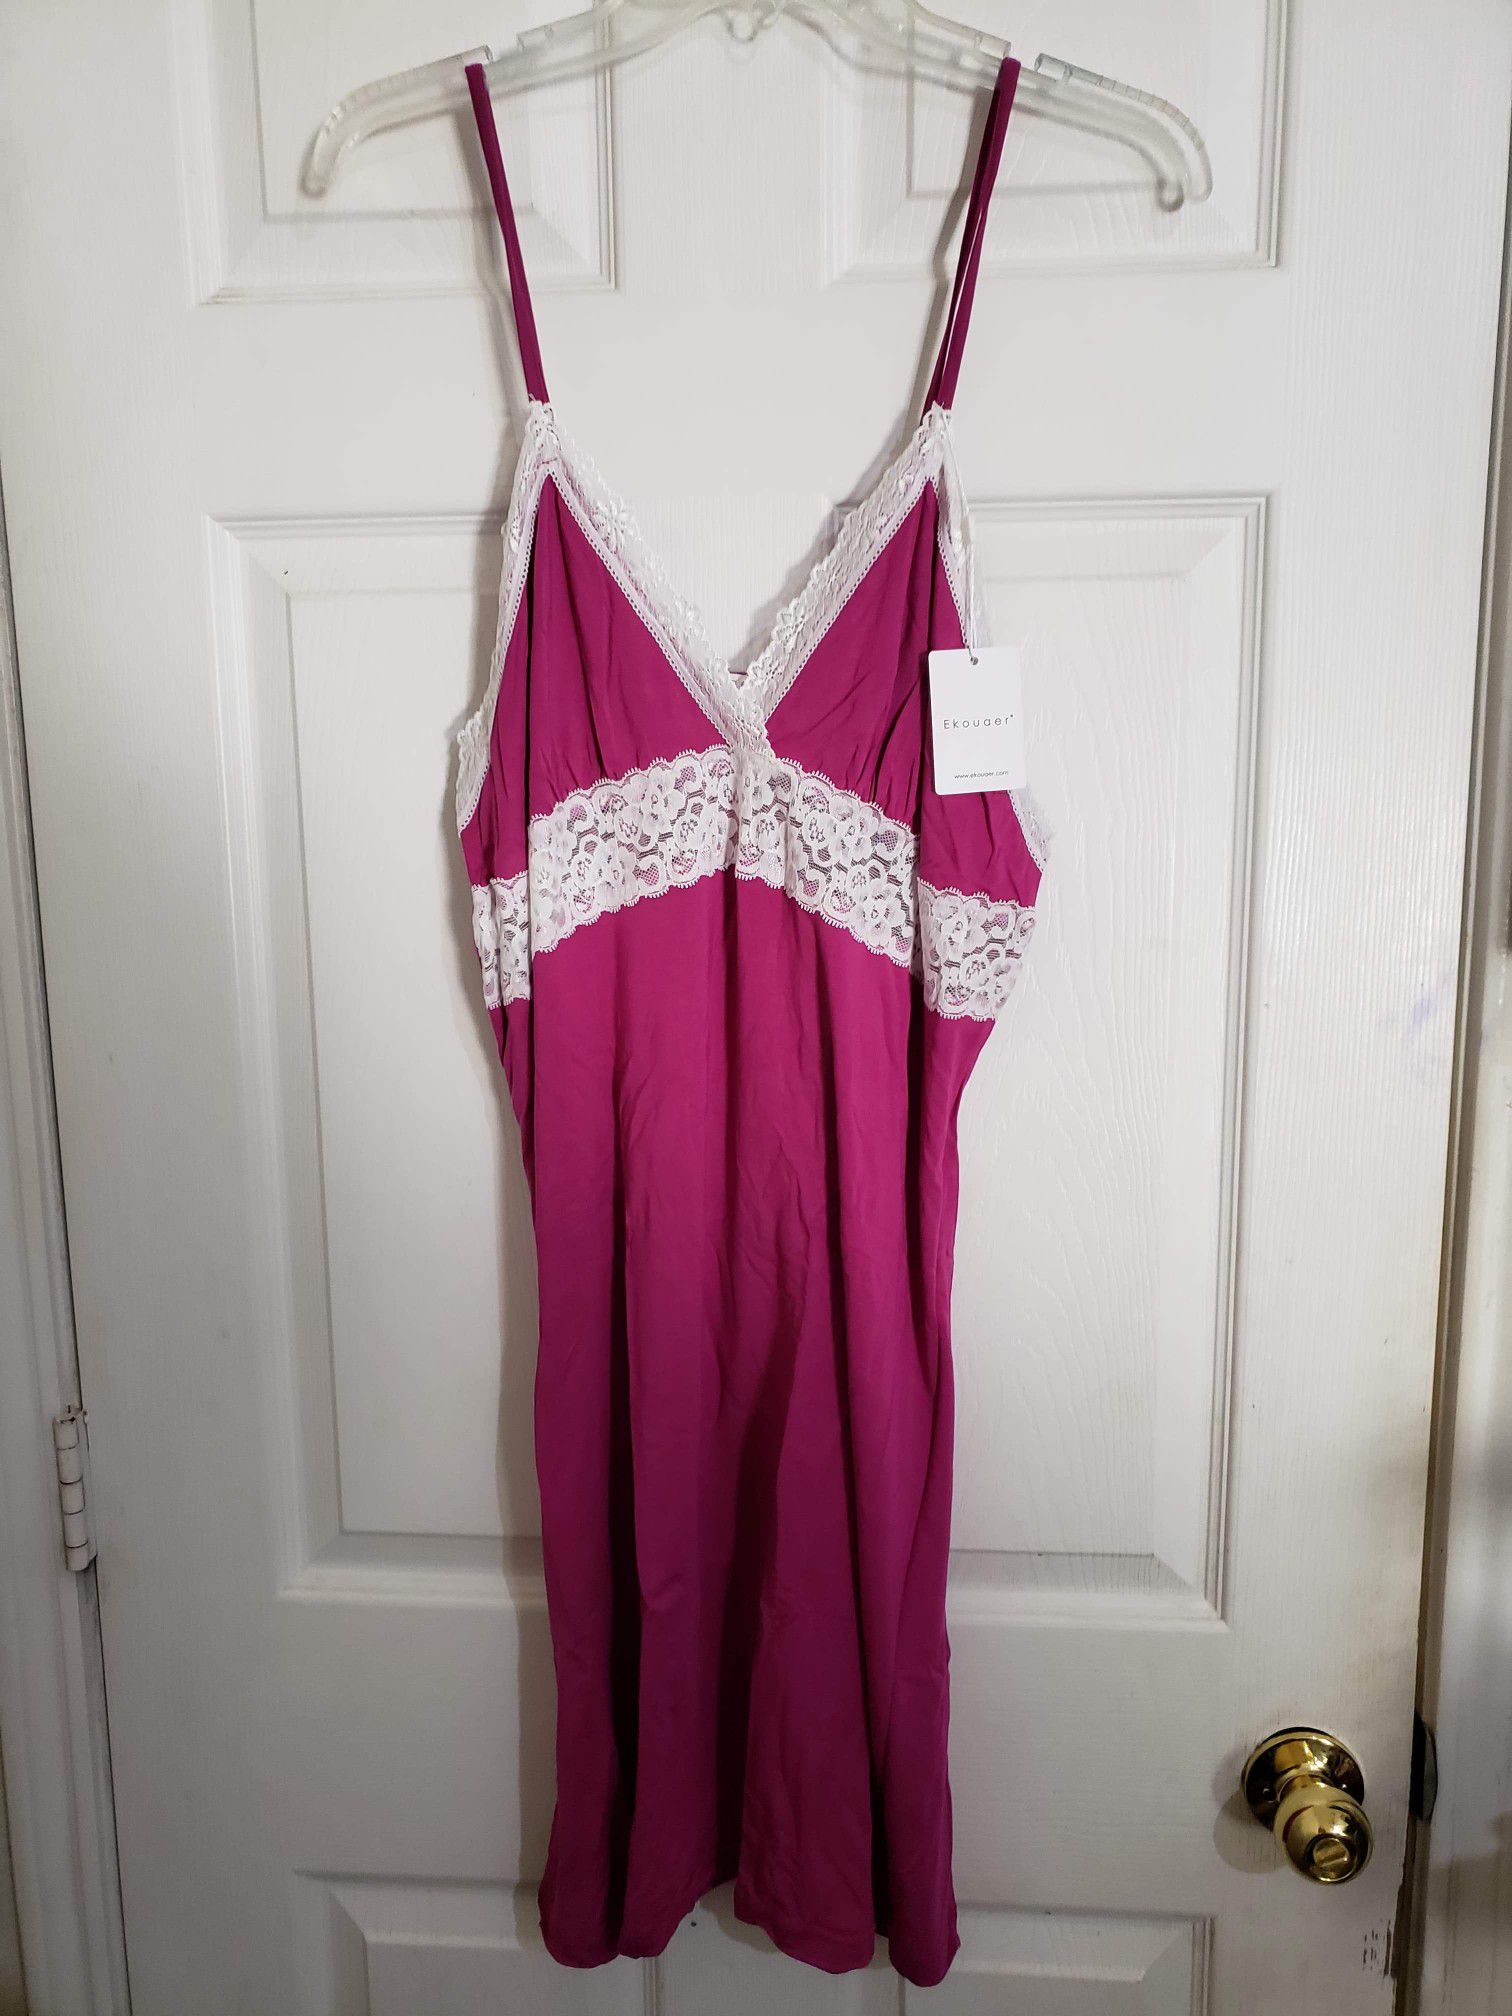 Womens Nightgown Chemise, Purple.Size XL, New with tags.